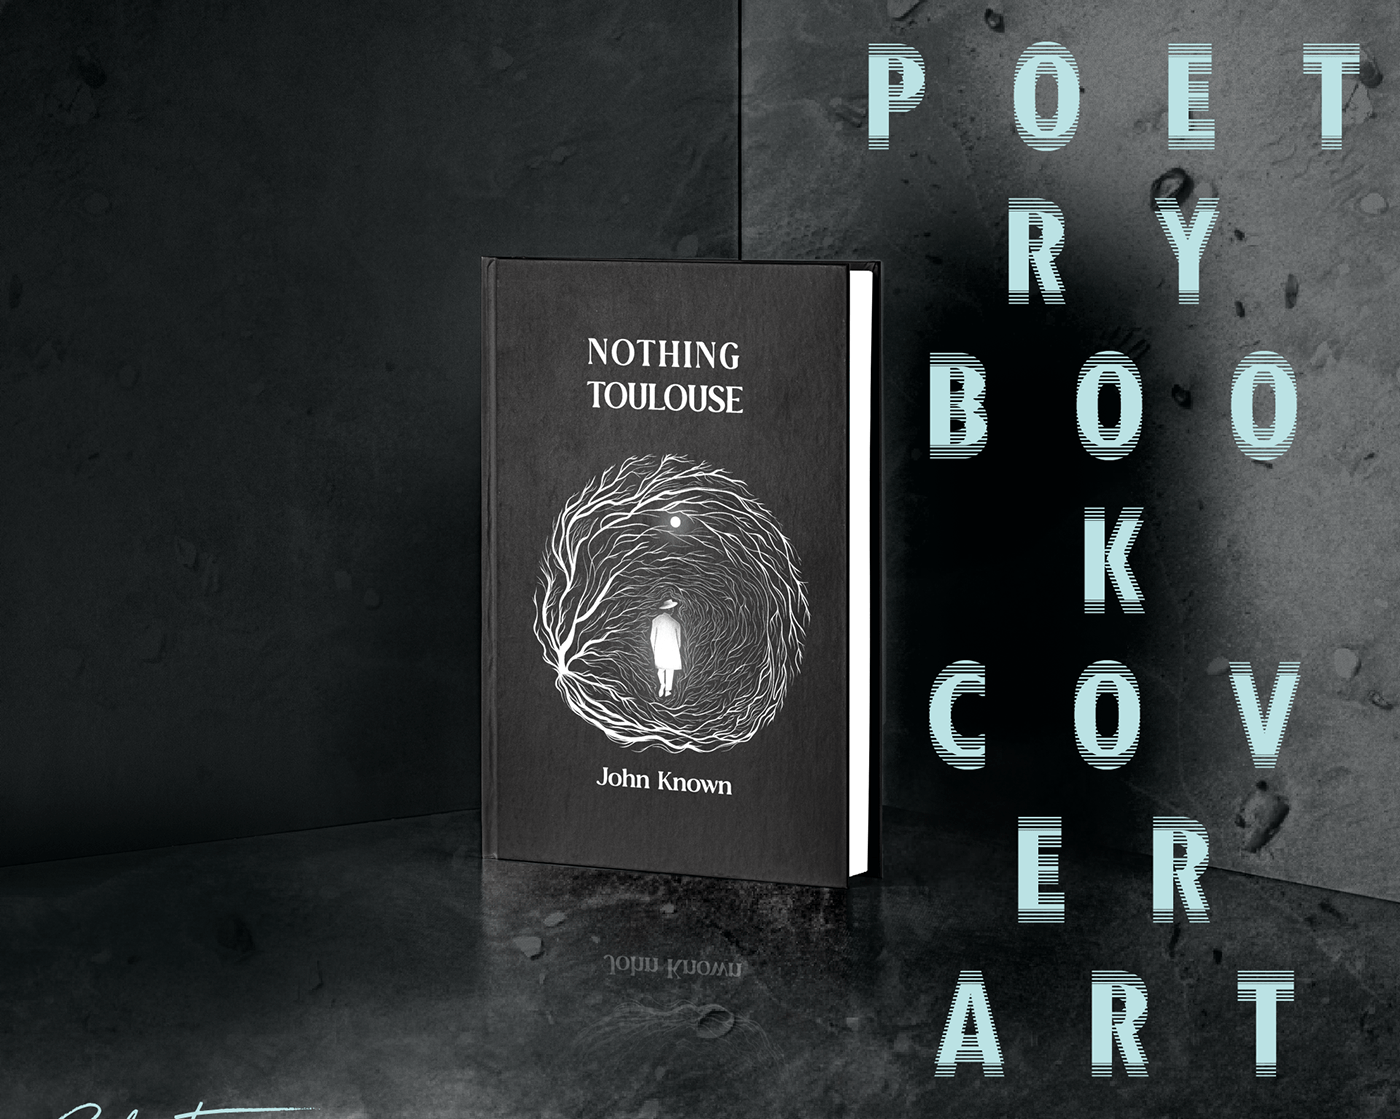 poetry book cover design book cover Poetry  book design ebook cover Book Cover Design amazon kindle noir amazon kdp